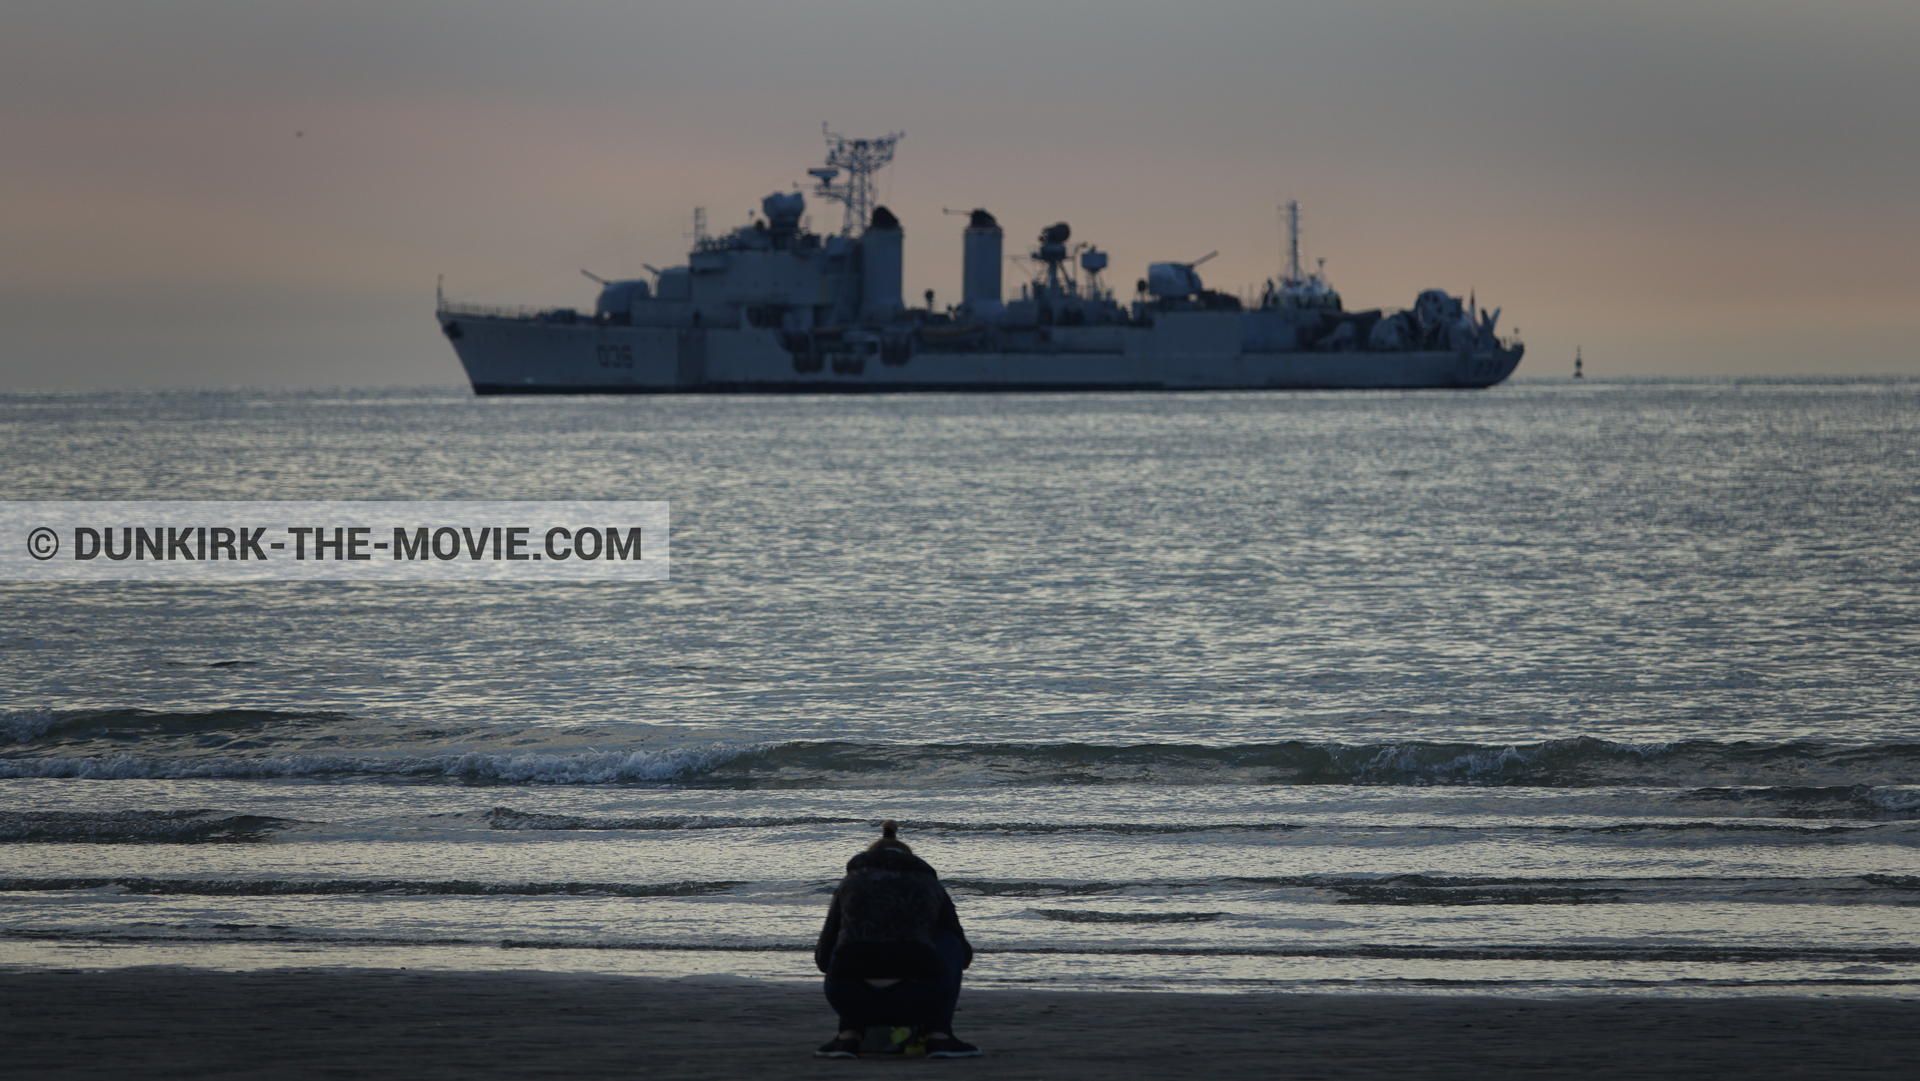 Picture with Maillé-Brézé - D36 - D54, calm sea, beach,  from behind the scene of the Dunkirk movie by Nolan